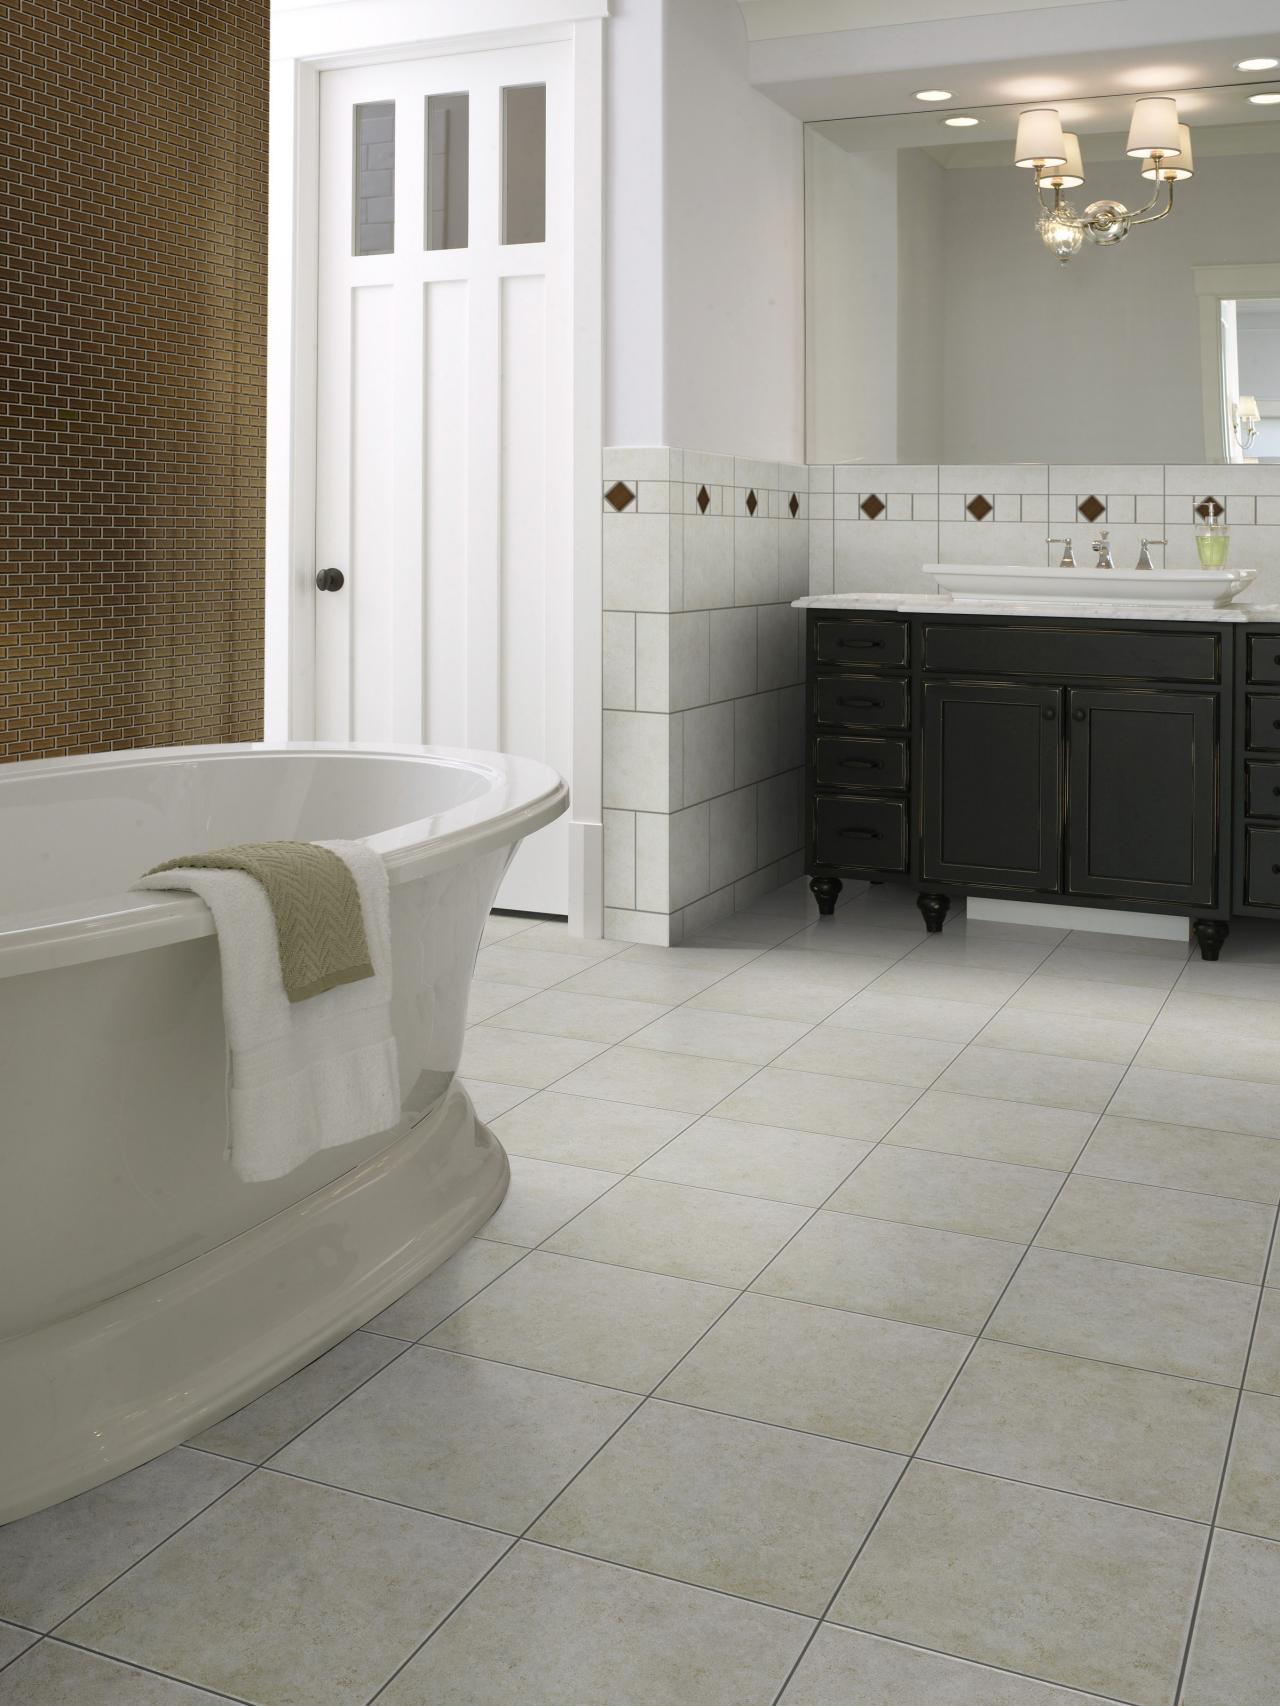 Wonderful Ideas And Pictures Of Decorative Bathroom Tile Borders